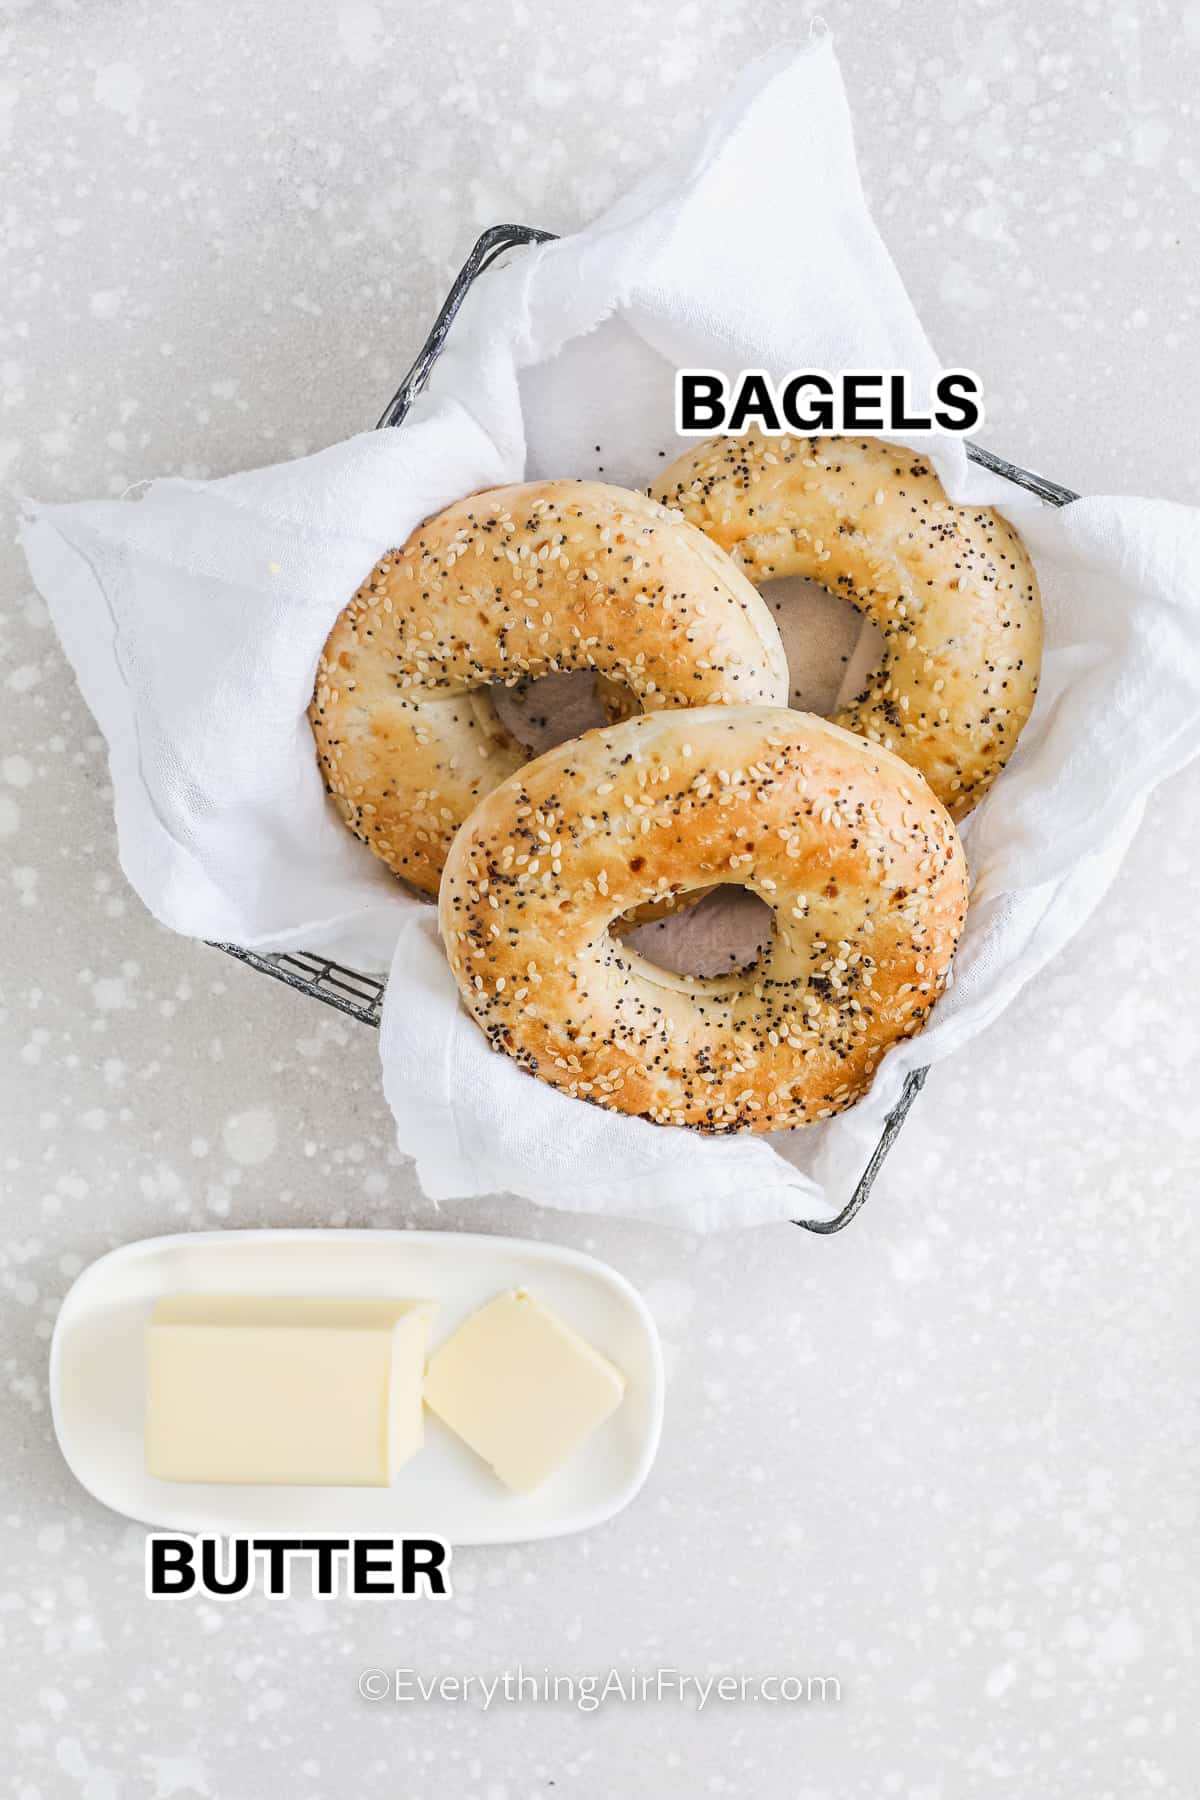 ingredients for bagel in air fryer including bagels and butter